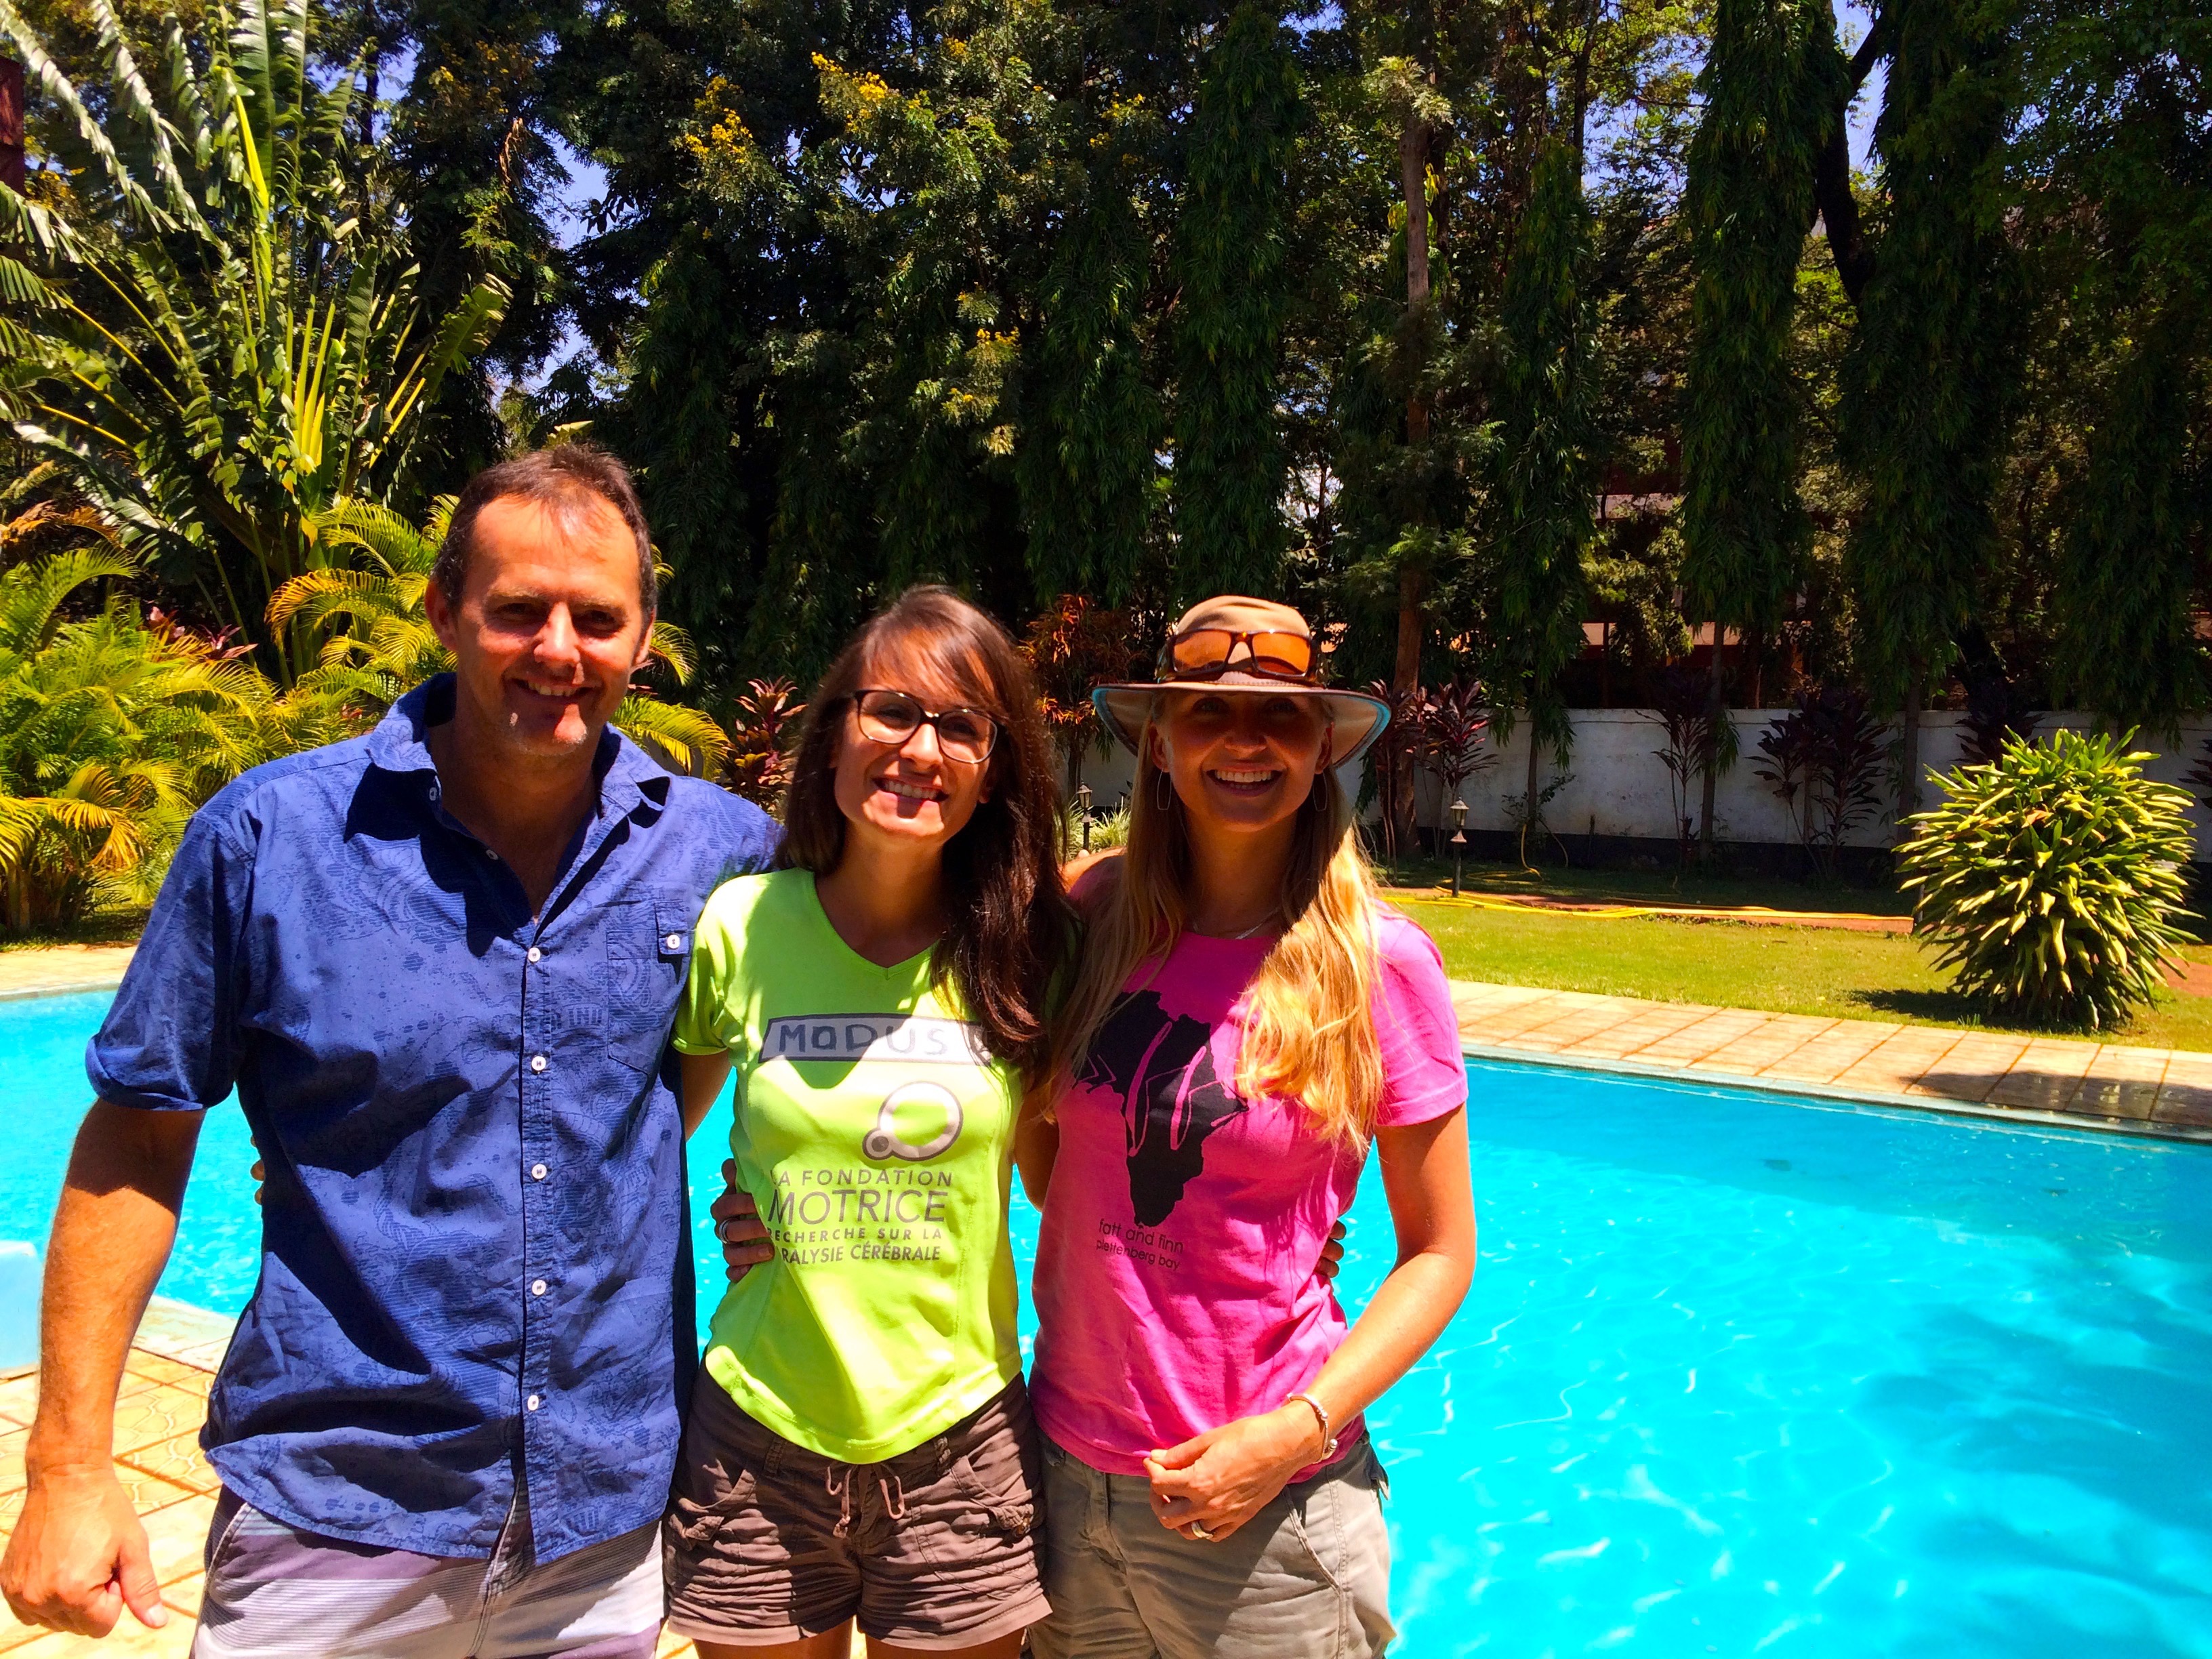 Paul and Debbie – Interview for Kilimanjaro